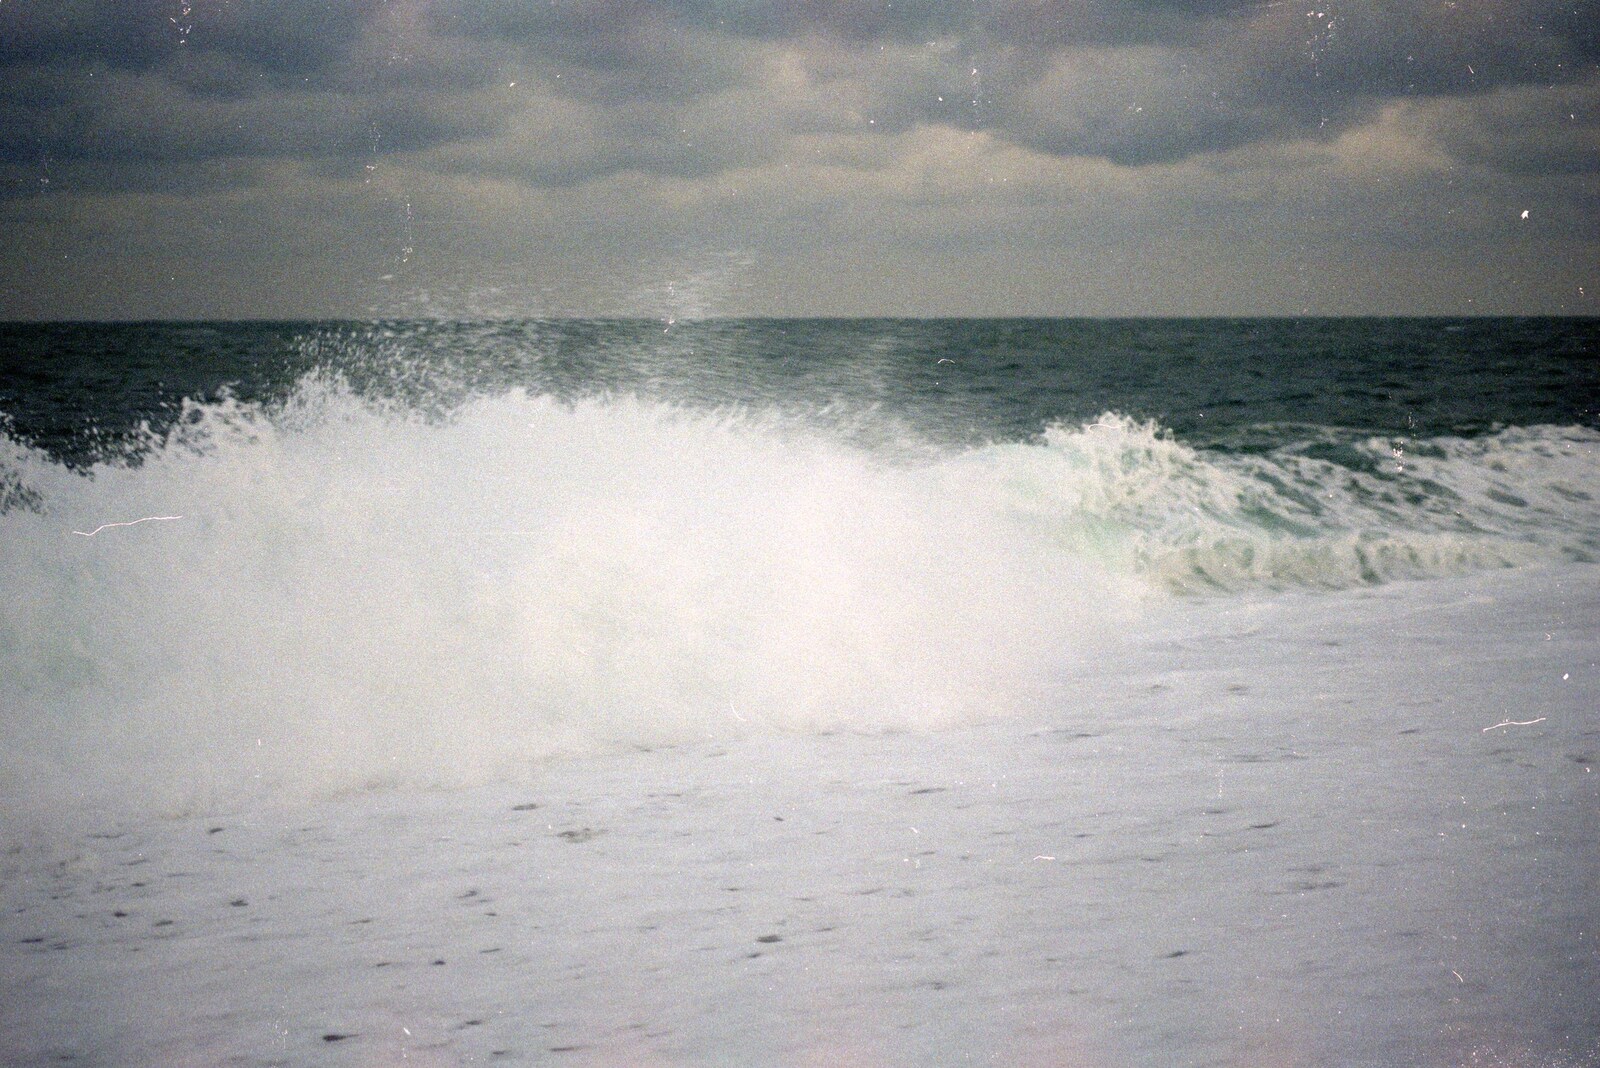 Some stormy sea action from Uni: Wembury and Slapton, Devon - 18th March 1989